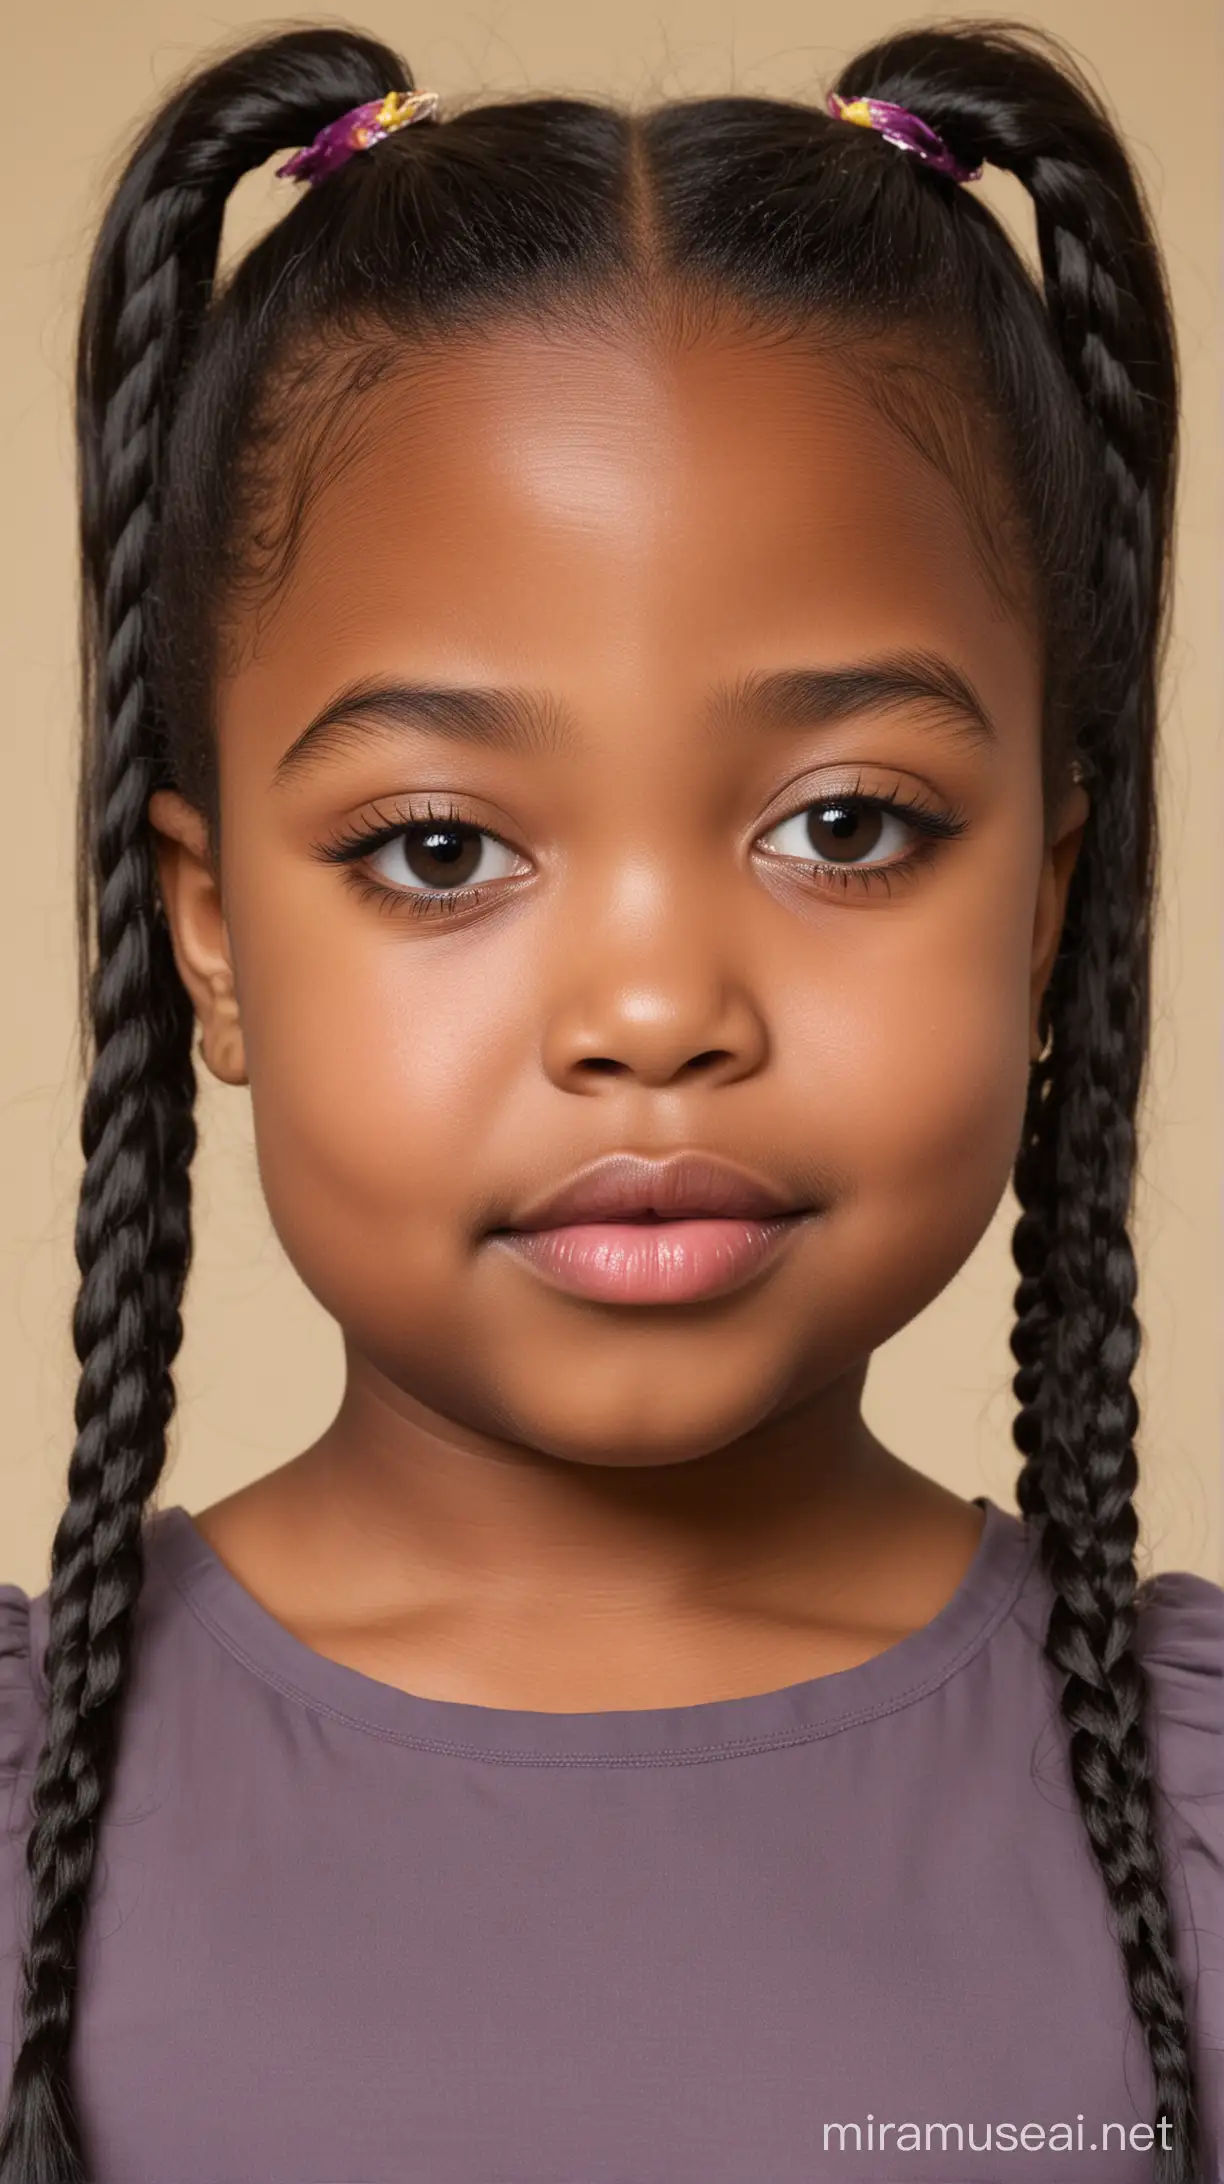 A 6 year old fat black girl with small eyes, wide lips, weak chin, small nose and long straight black hair with a long pigtail at back wearing a long skirt 